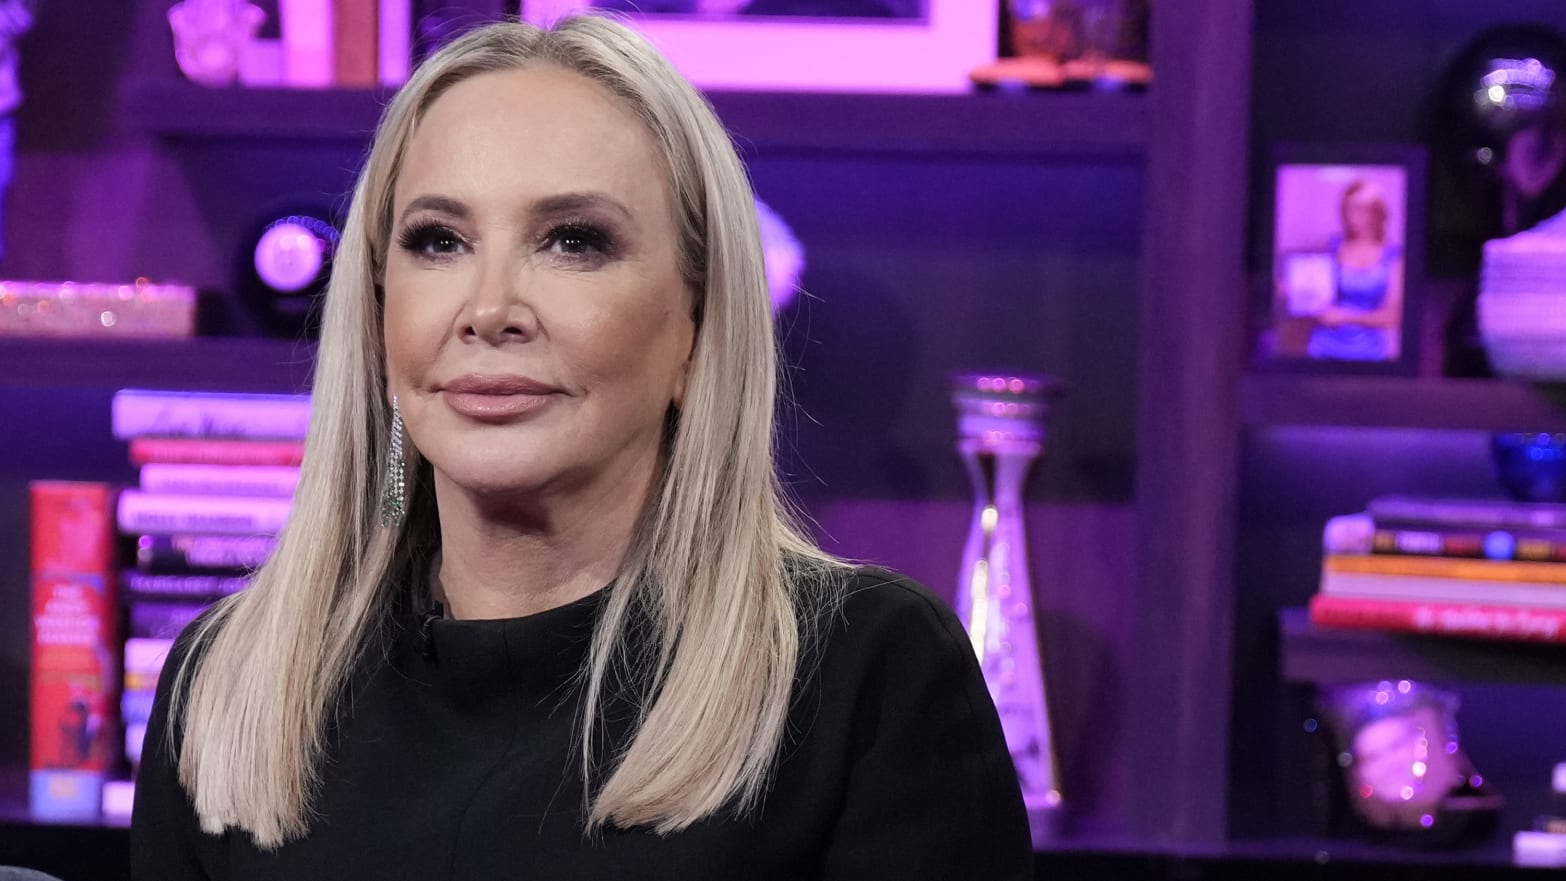 Shannon Beador appears on Bravo's "Watch What Happens Live"